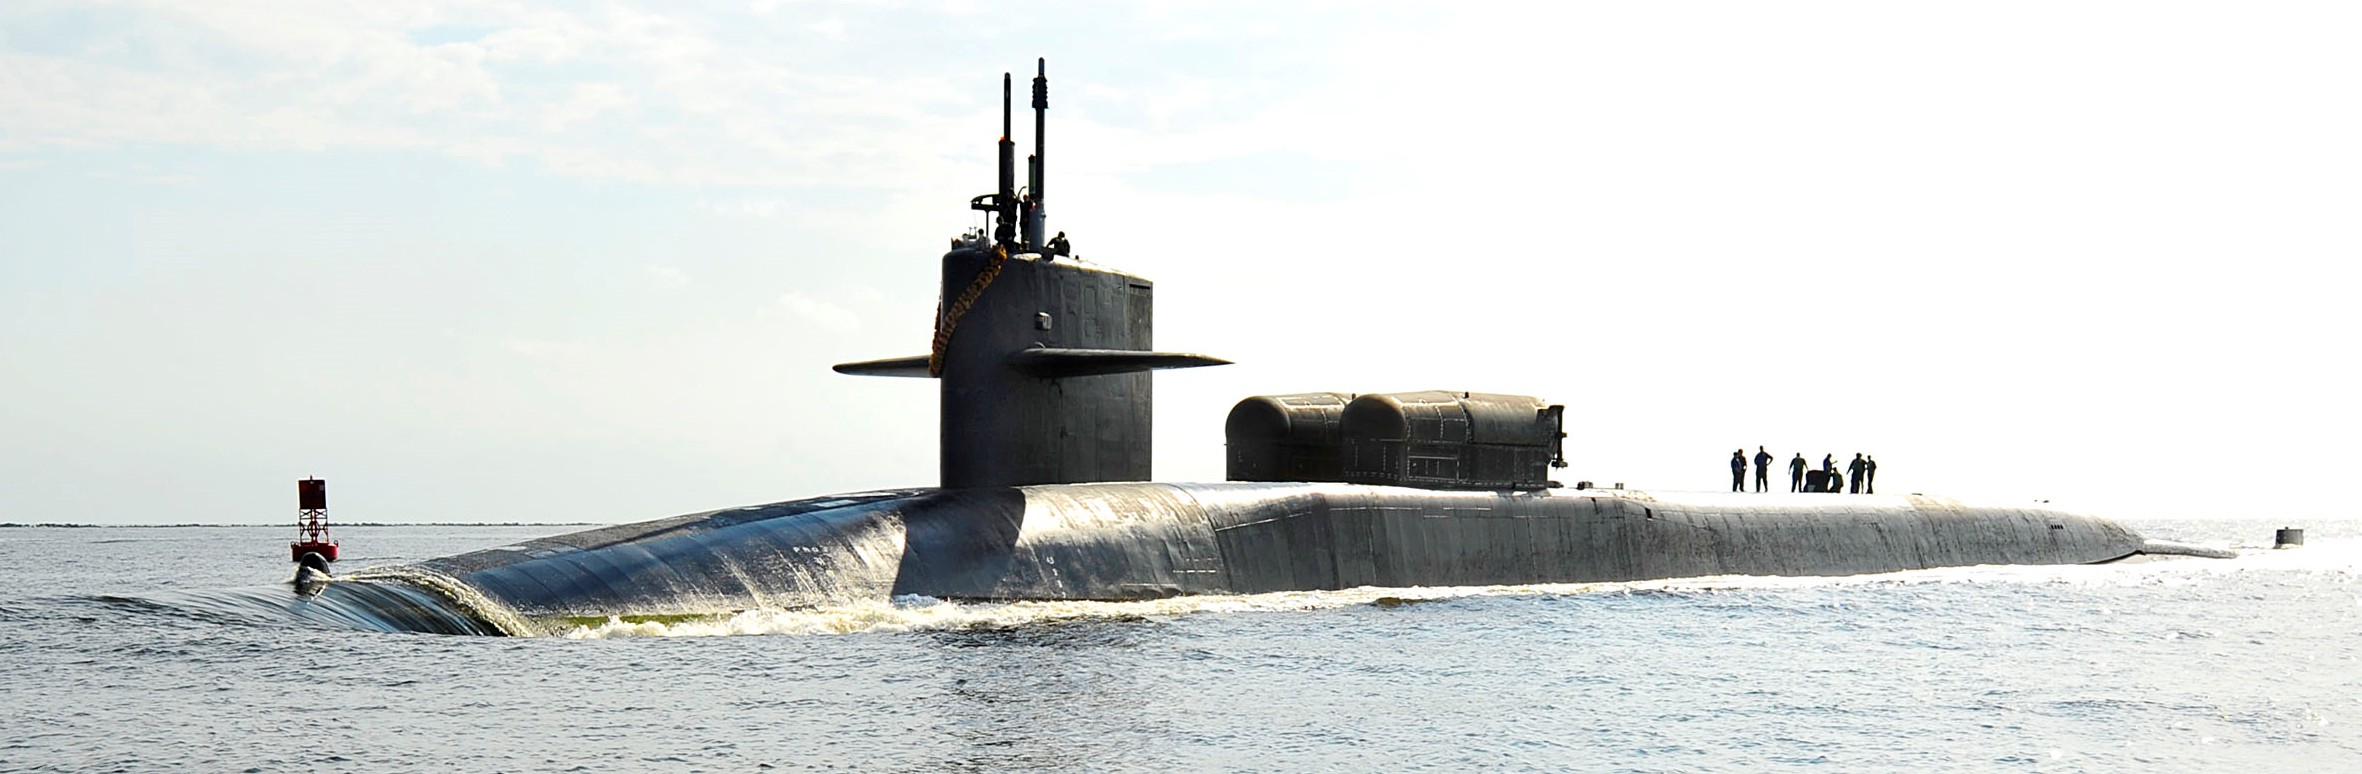 ssgn-728 uss florida guided missile submarine us navy 2013 10